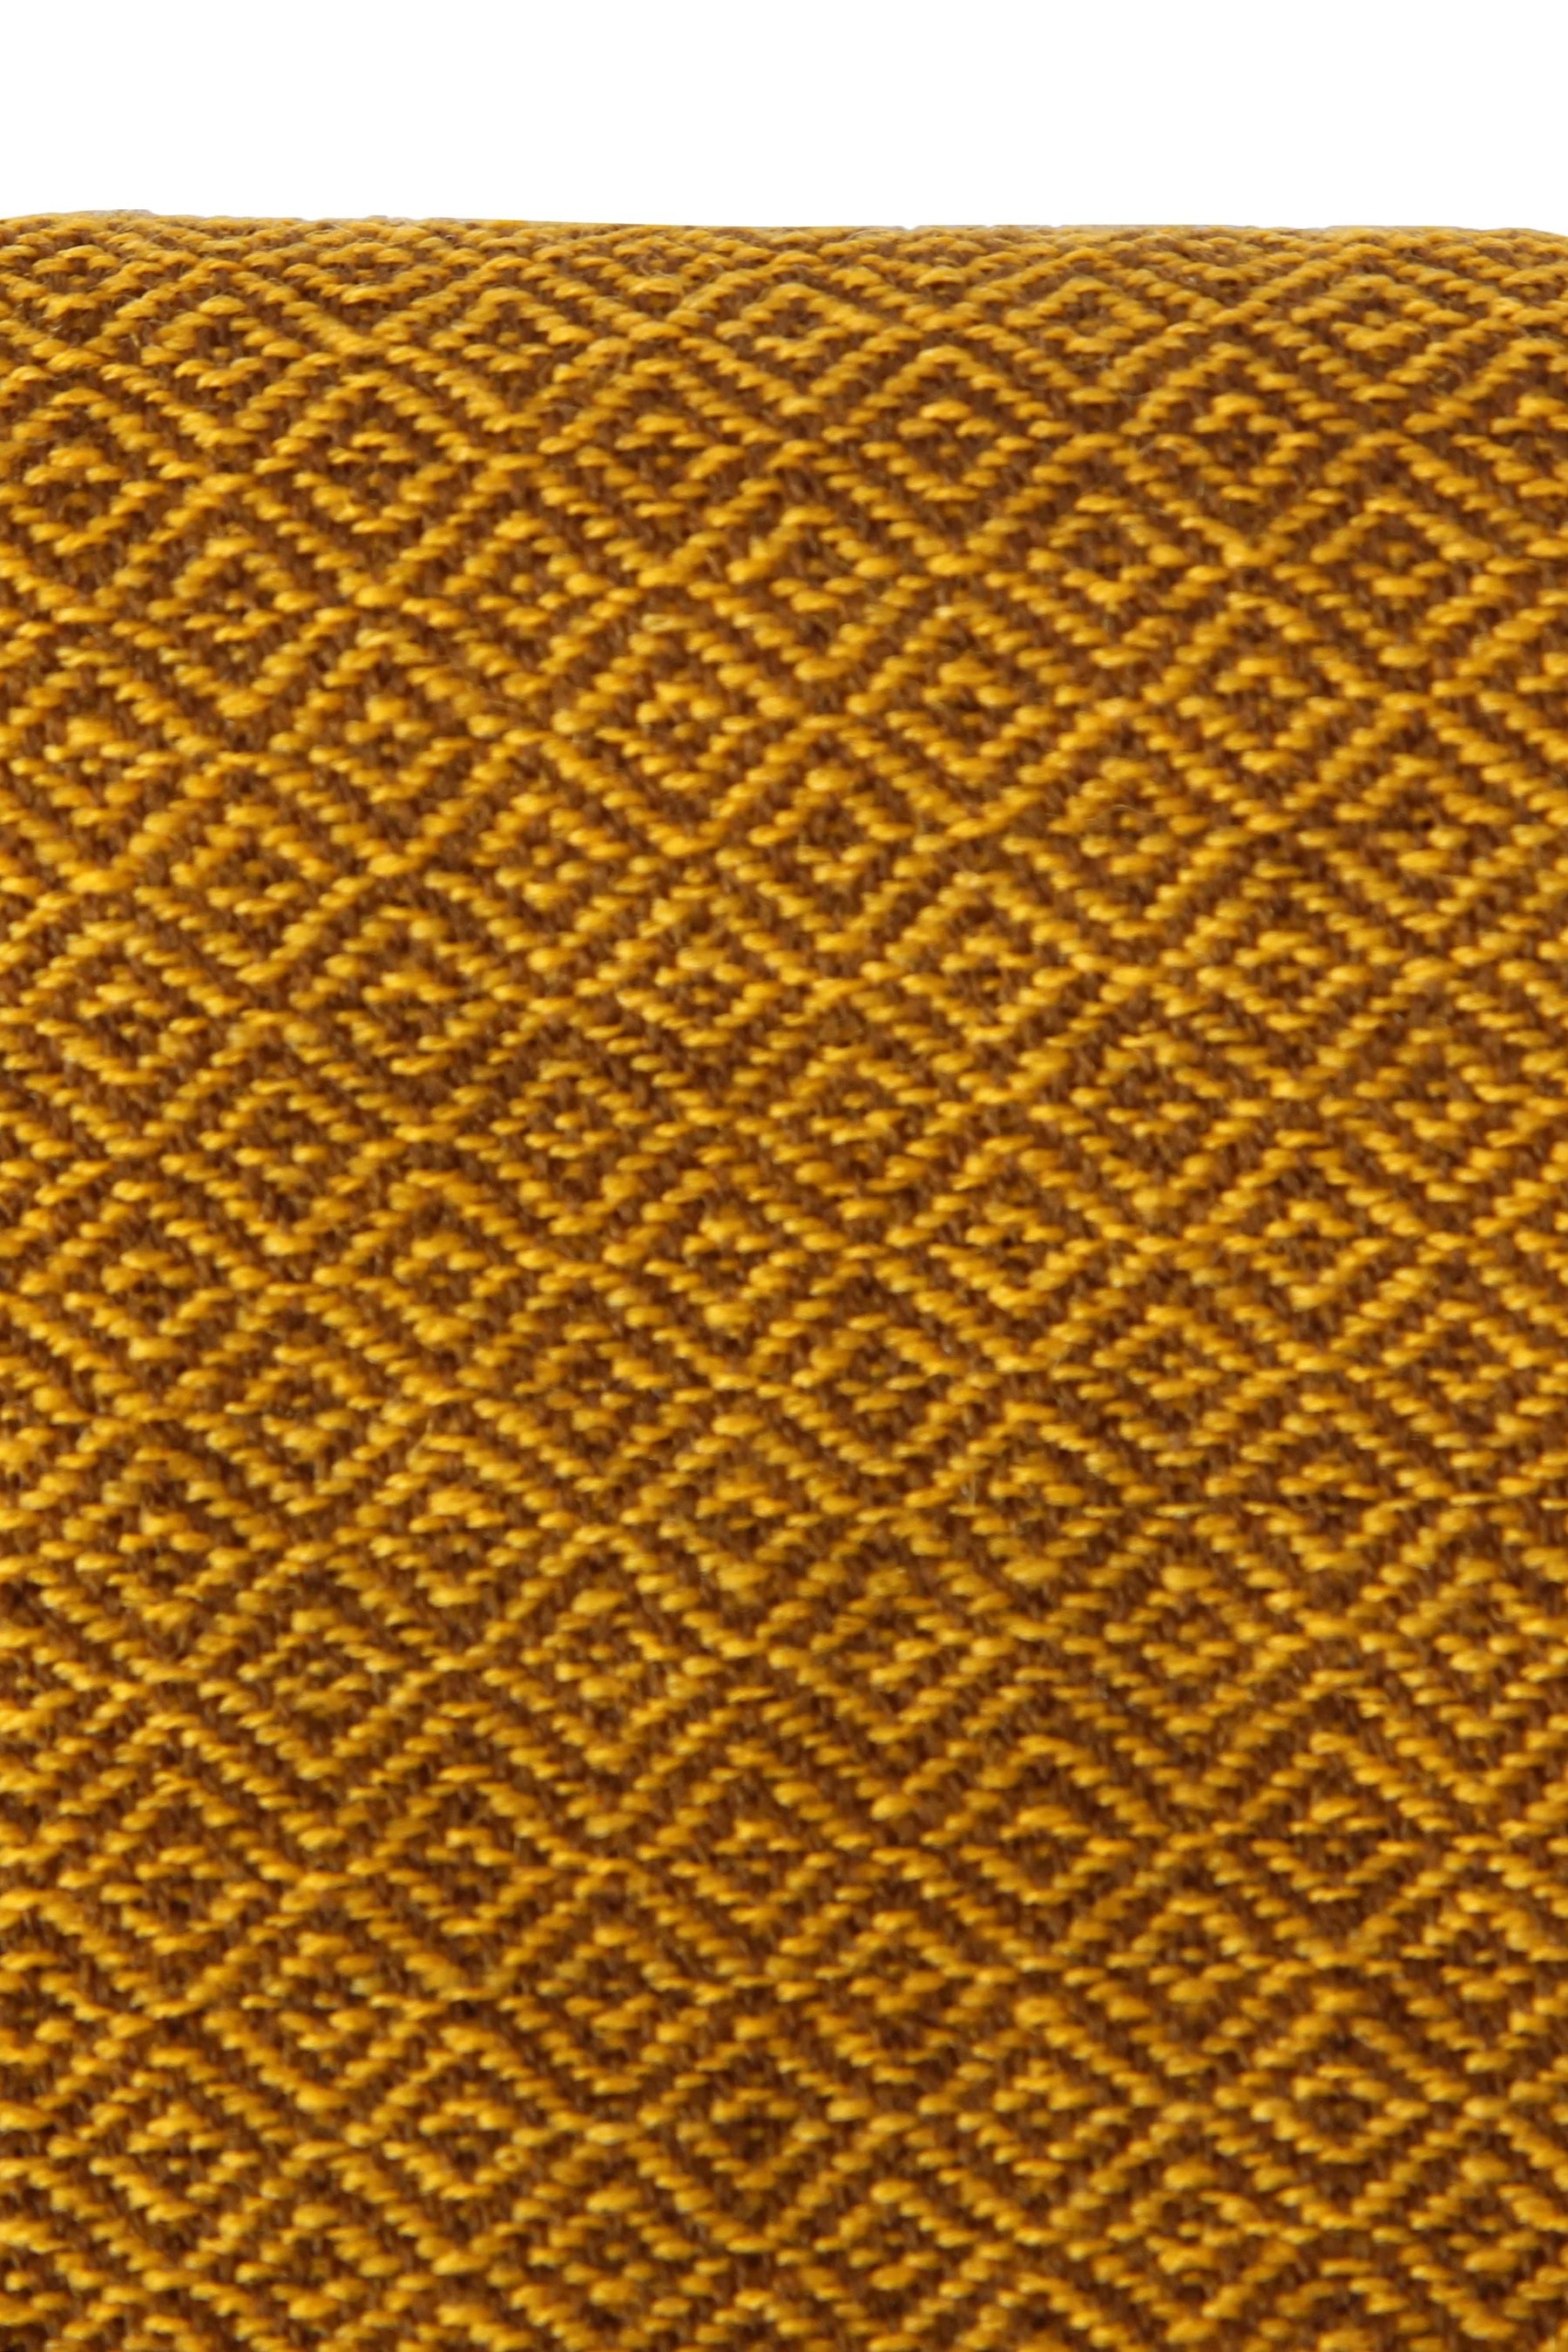 Eir hand-woven wool yellow / brown